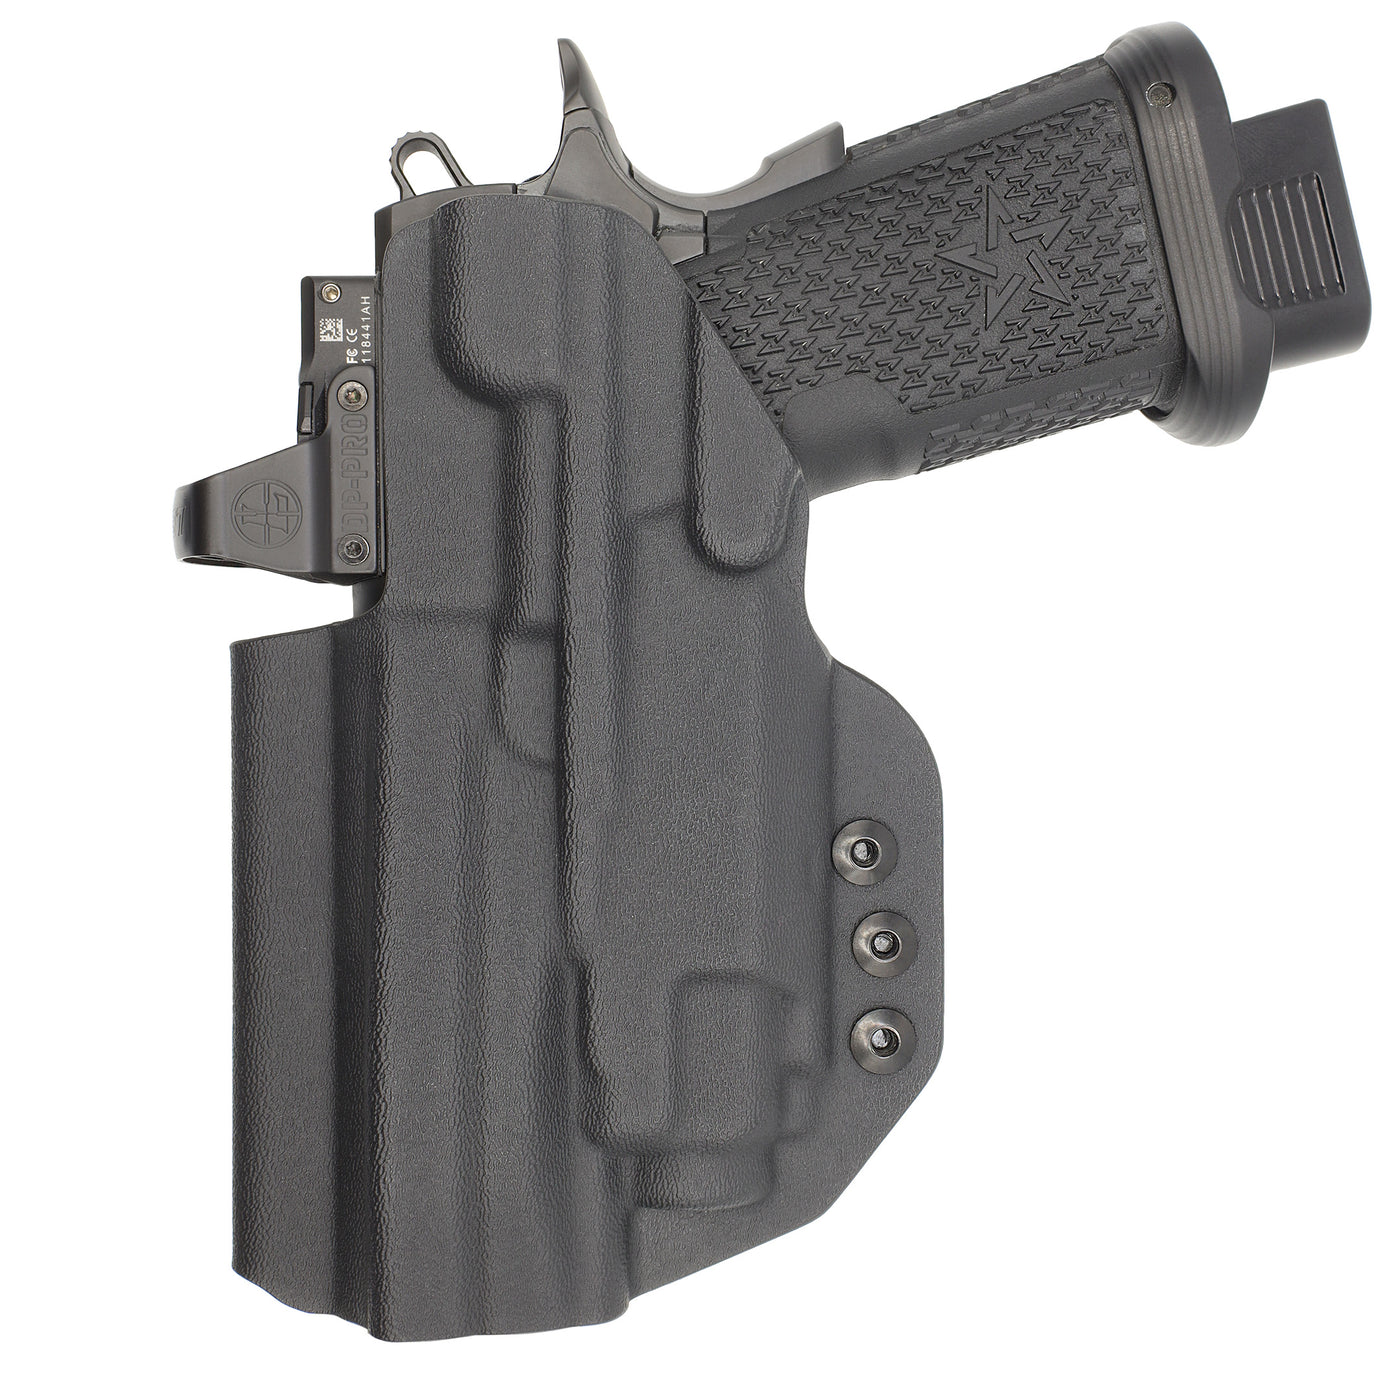 C&G Holsters custom IWB Tactical 1911 DS Prodigy streamlight TLR8 holstered back view